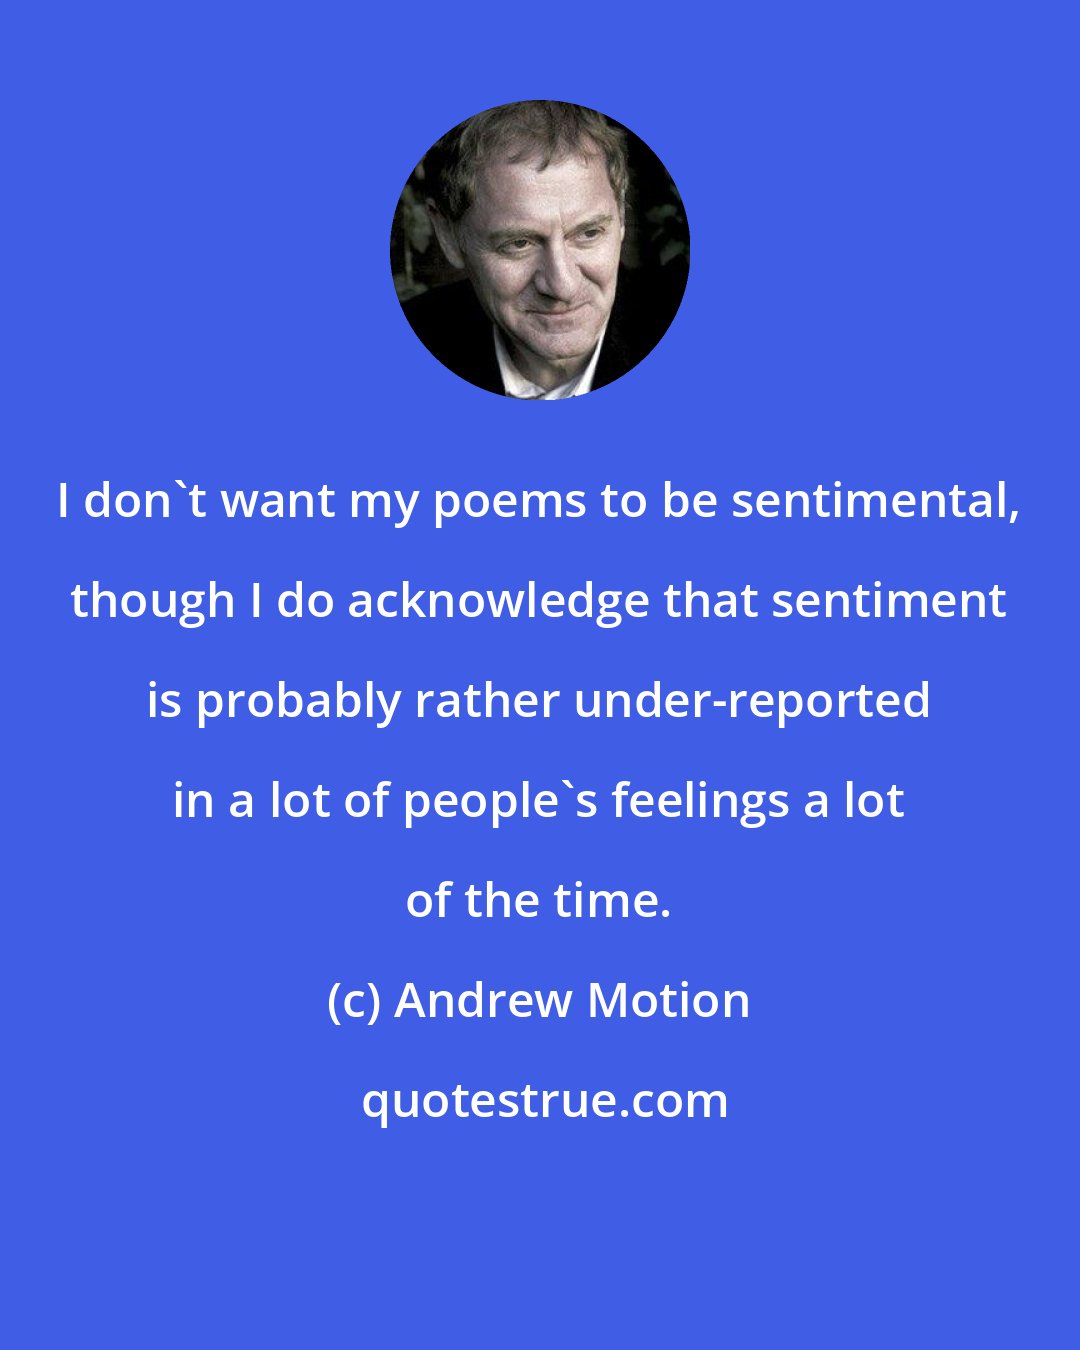 Andrew Motion: I don't want my poems to be sentimental, though I do acknowledge that sentiment is probably rather under-reported in a lot of people's feelings a lot of the time.